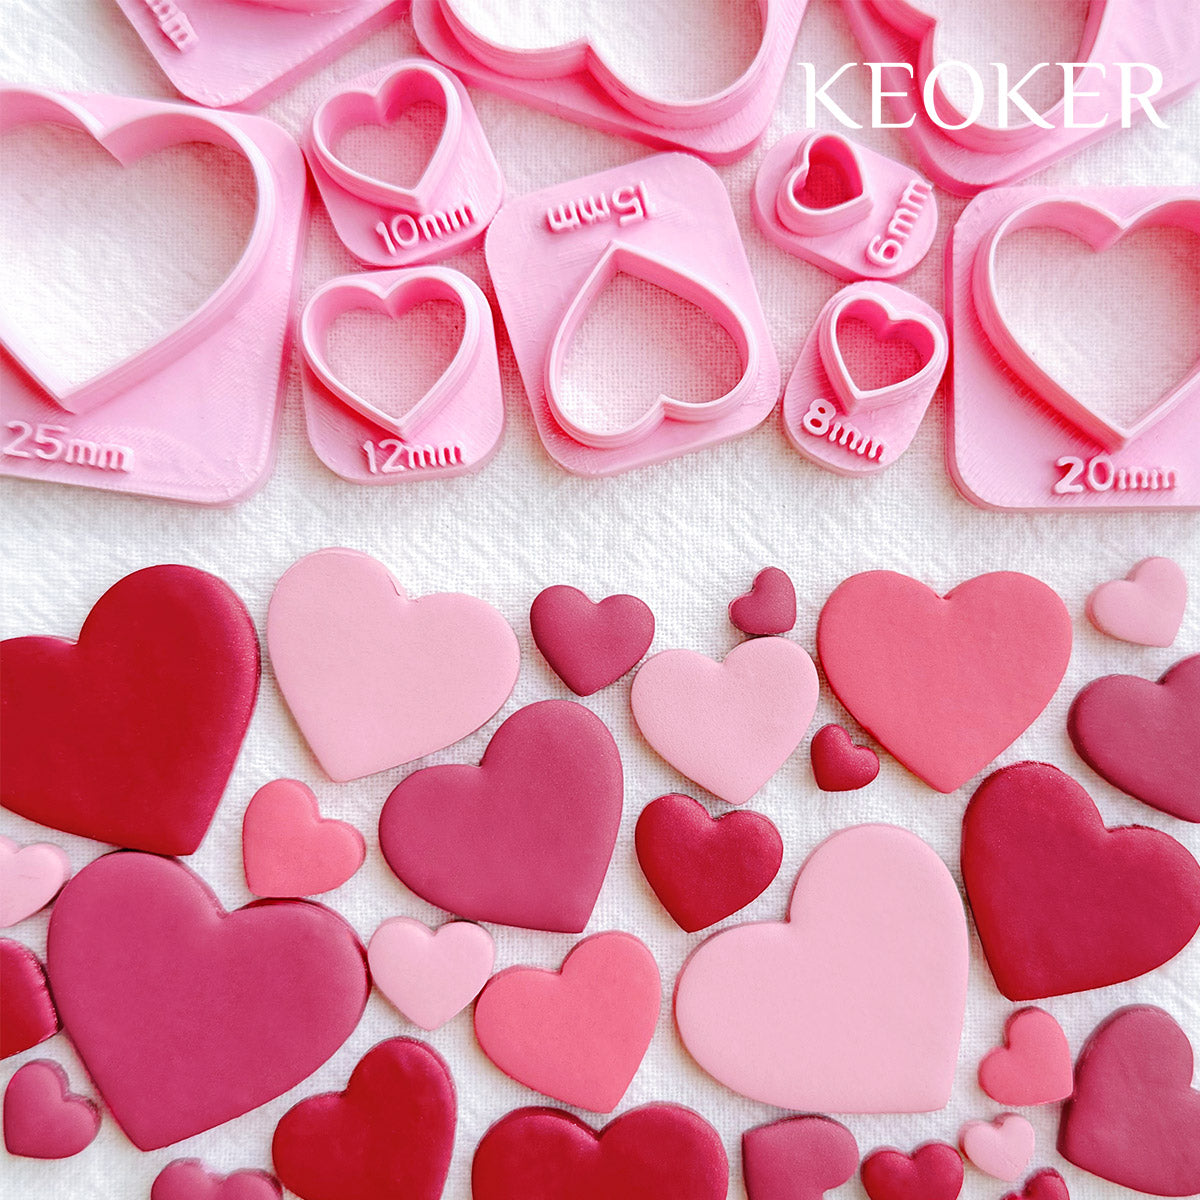 KEOKER Valentines Day Polymer Clay Cutters (10 Shapes)